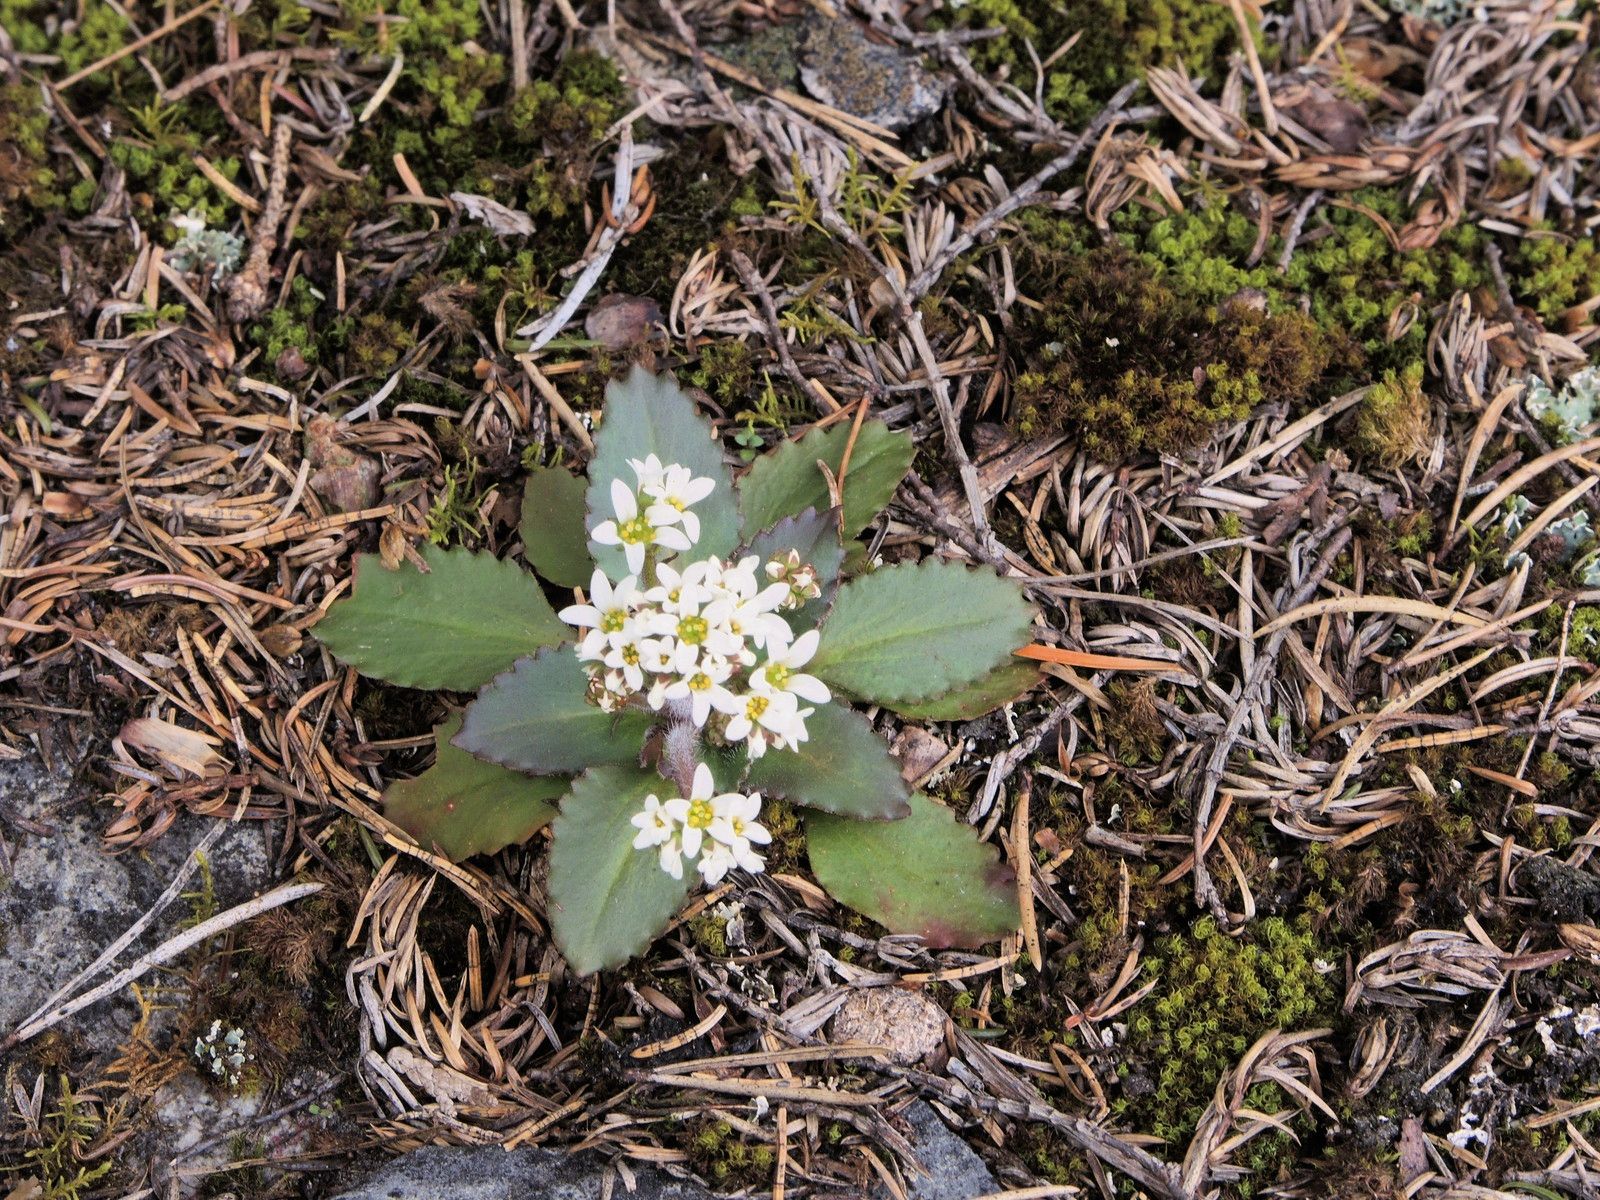 201405270859002 Saxifrage, early (Saxifraga virginiensis) white flowers - Misery Bay NP, Manitoulin Island.JPG